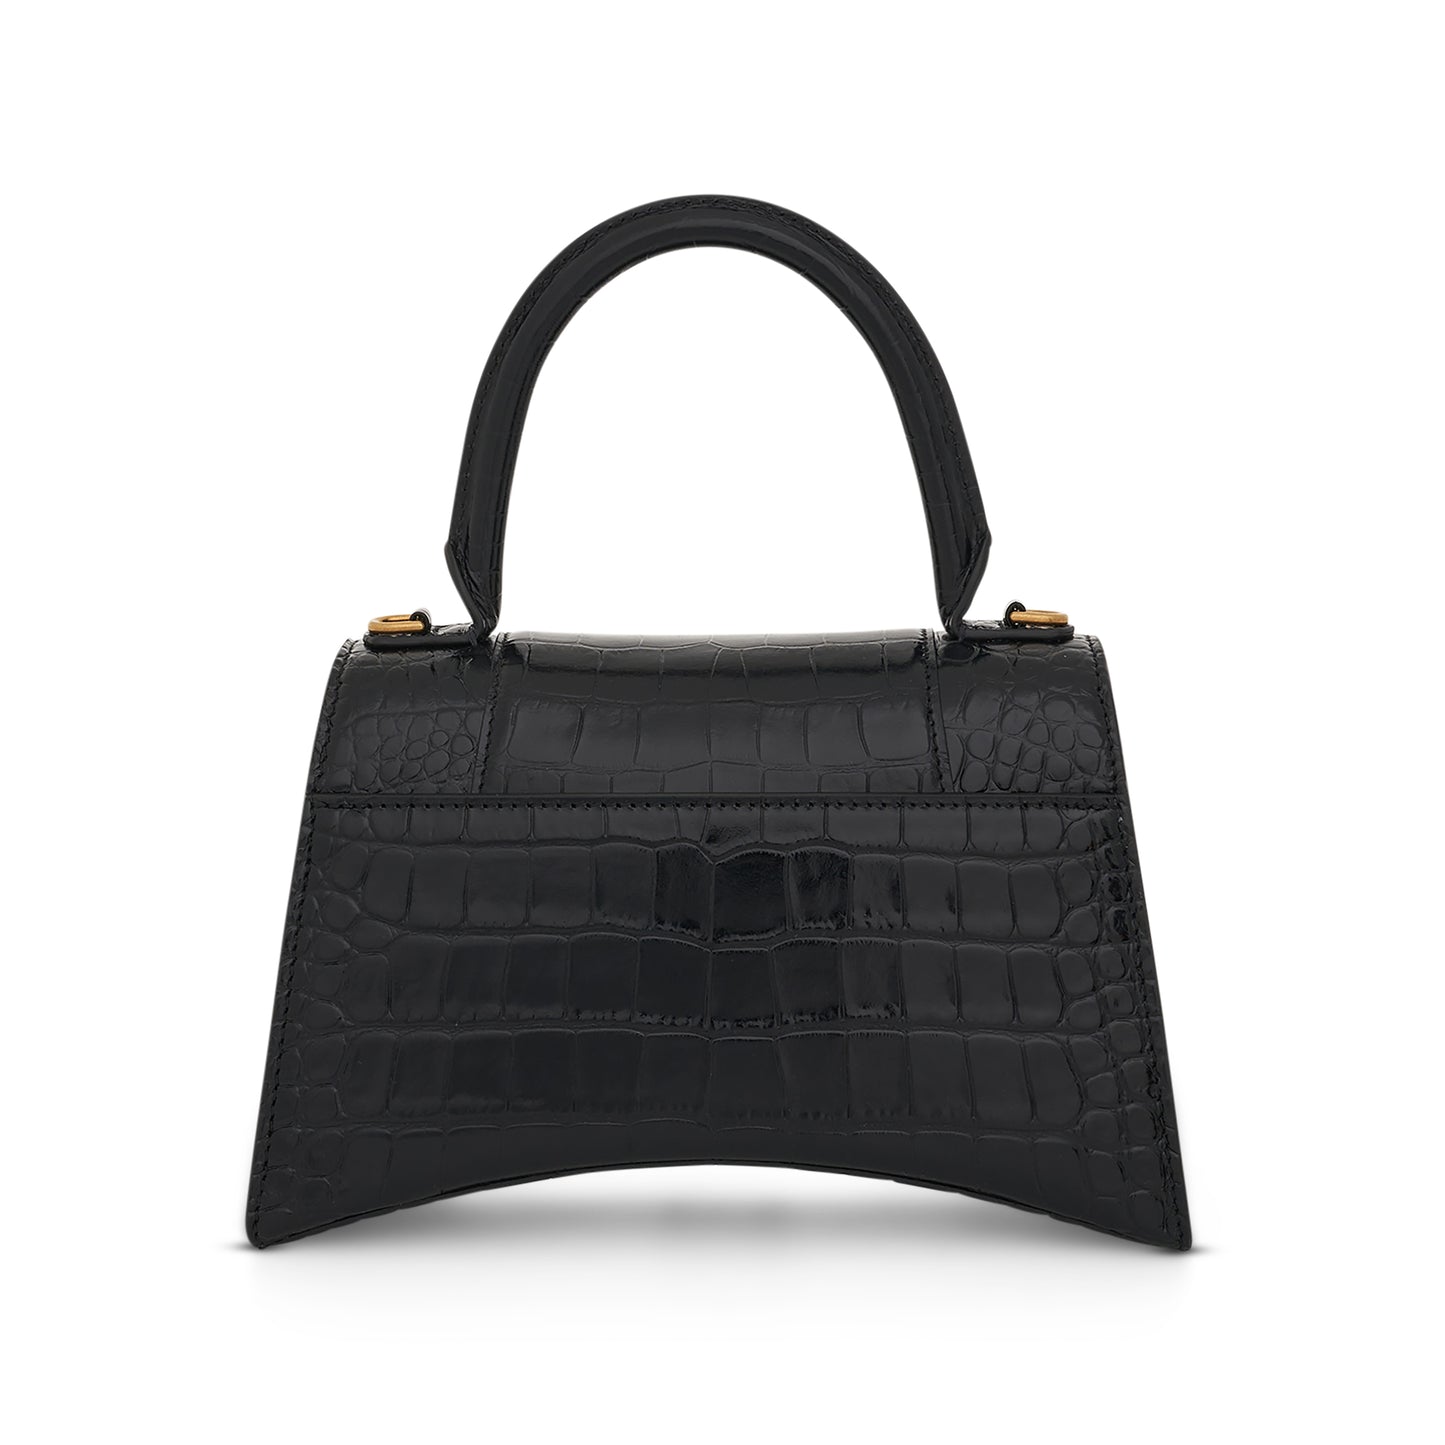 Hourglass Small Croco Embossed Bag in Black with Gold Plague